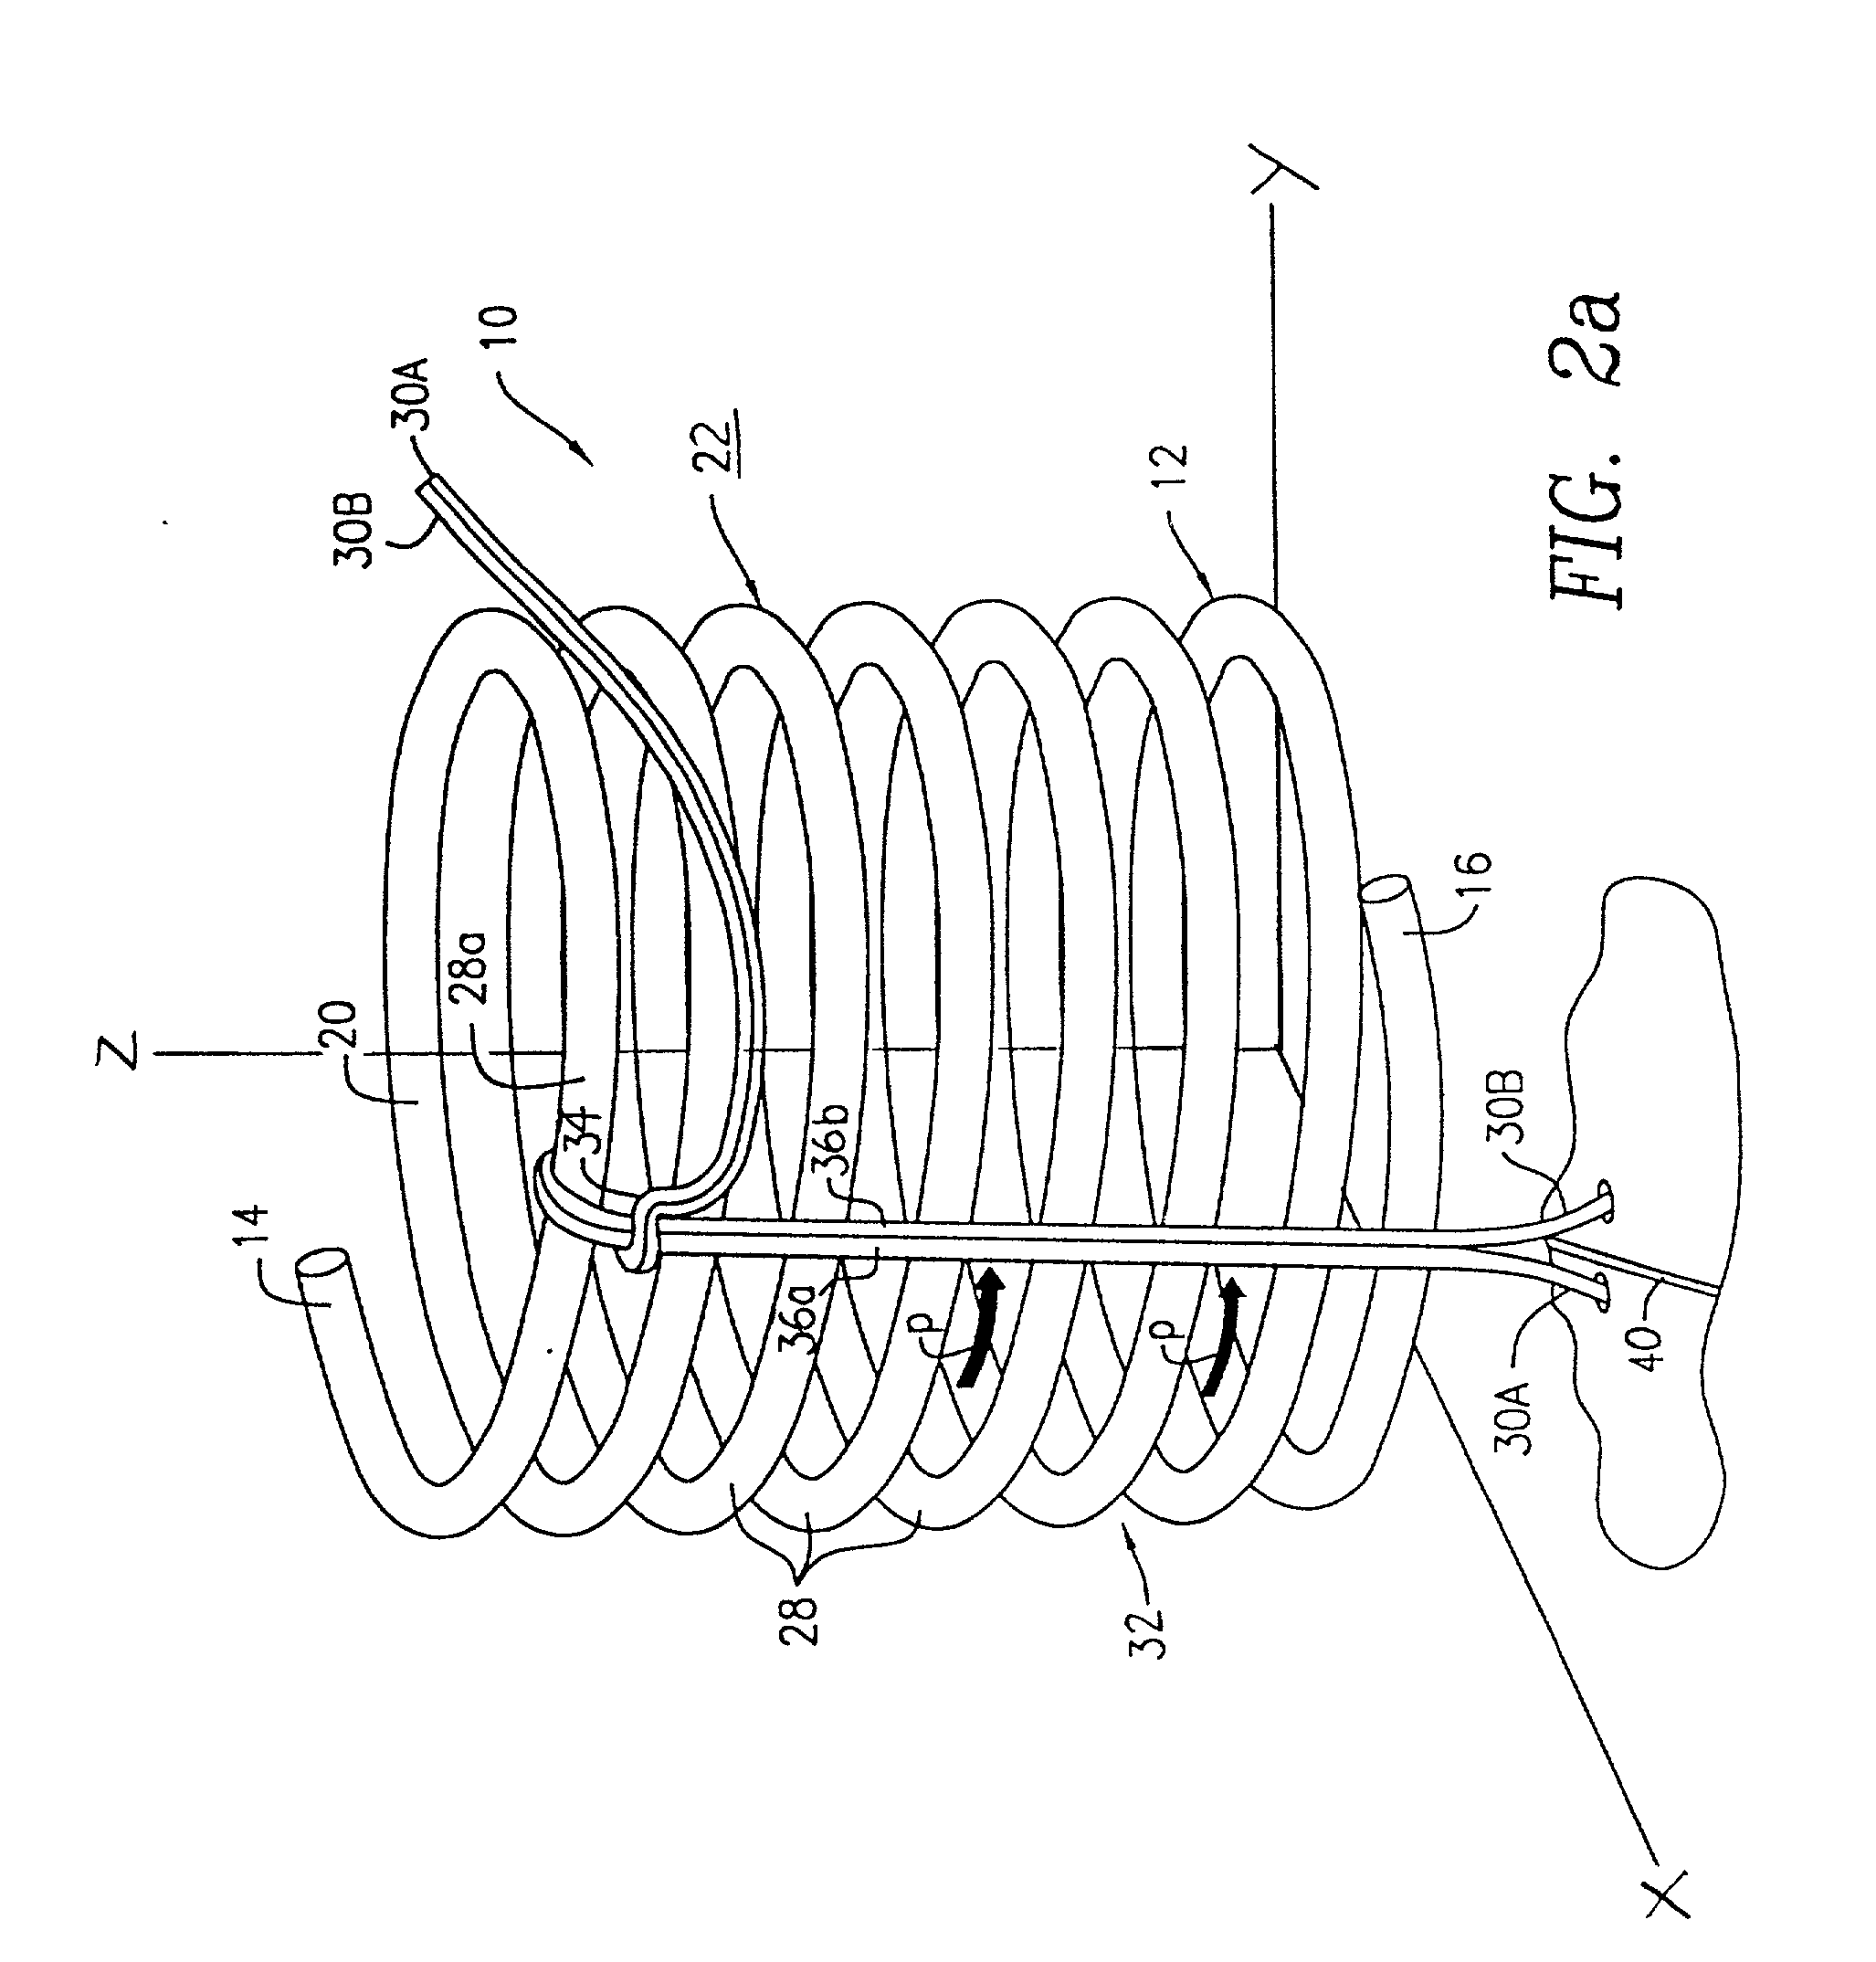 Suture anchoring and tensioning device and method for using same